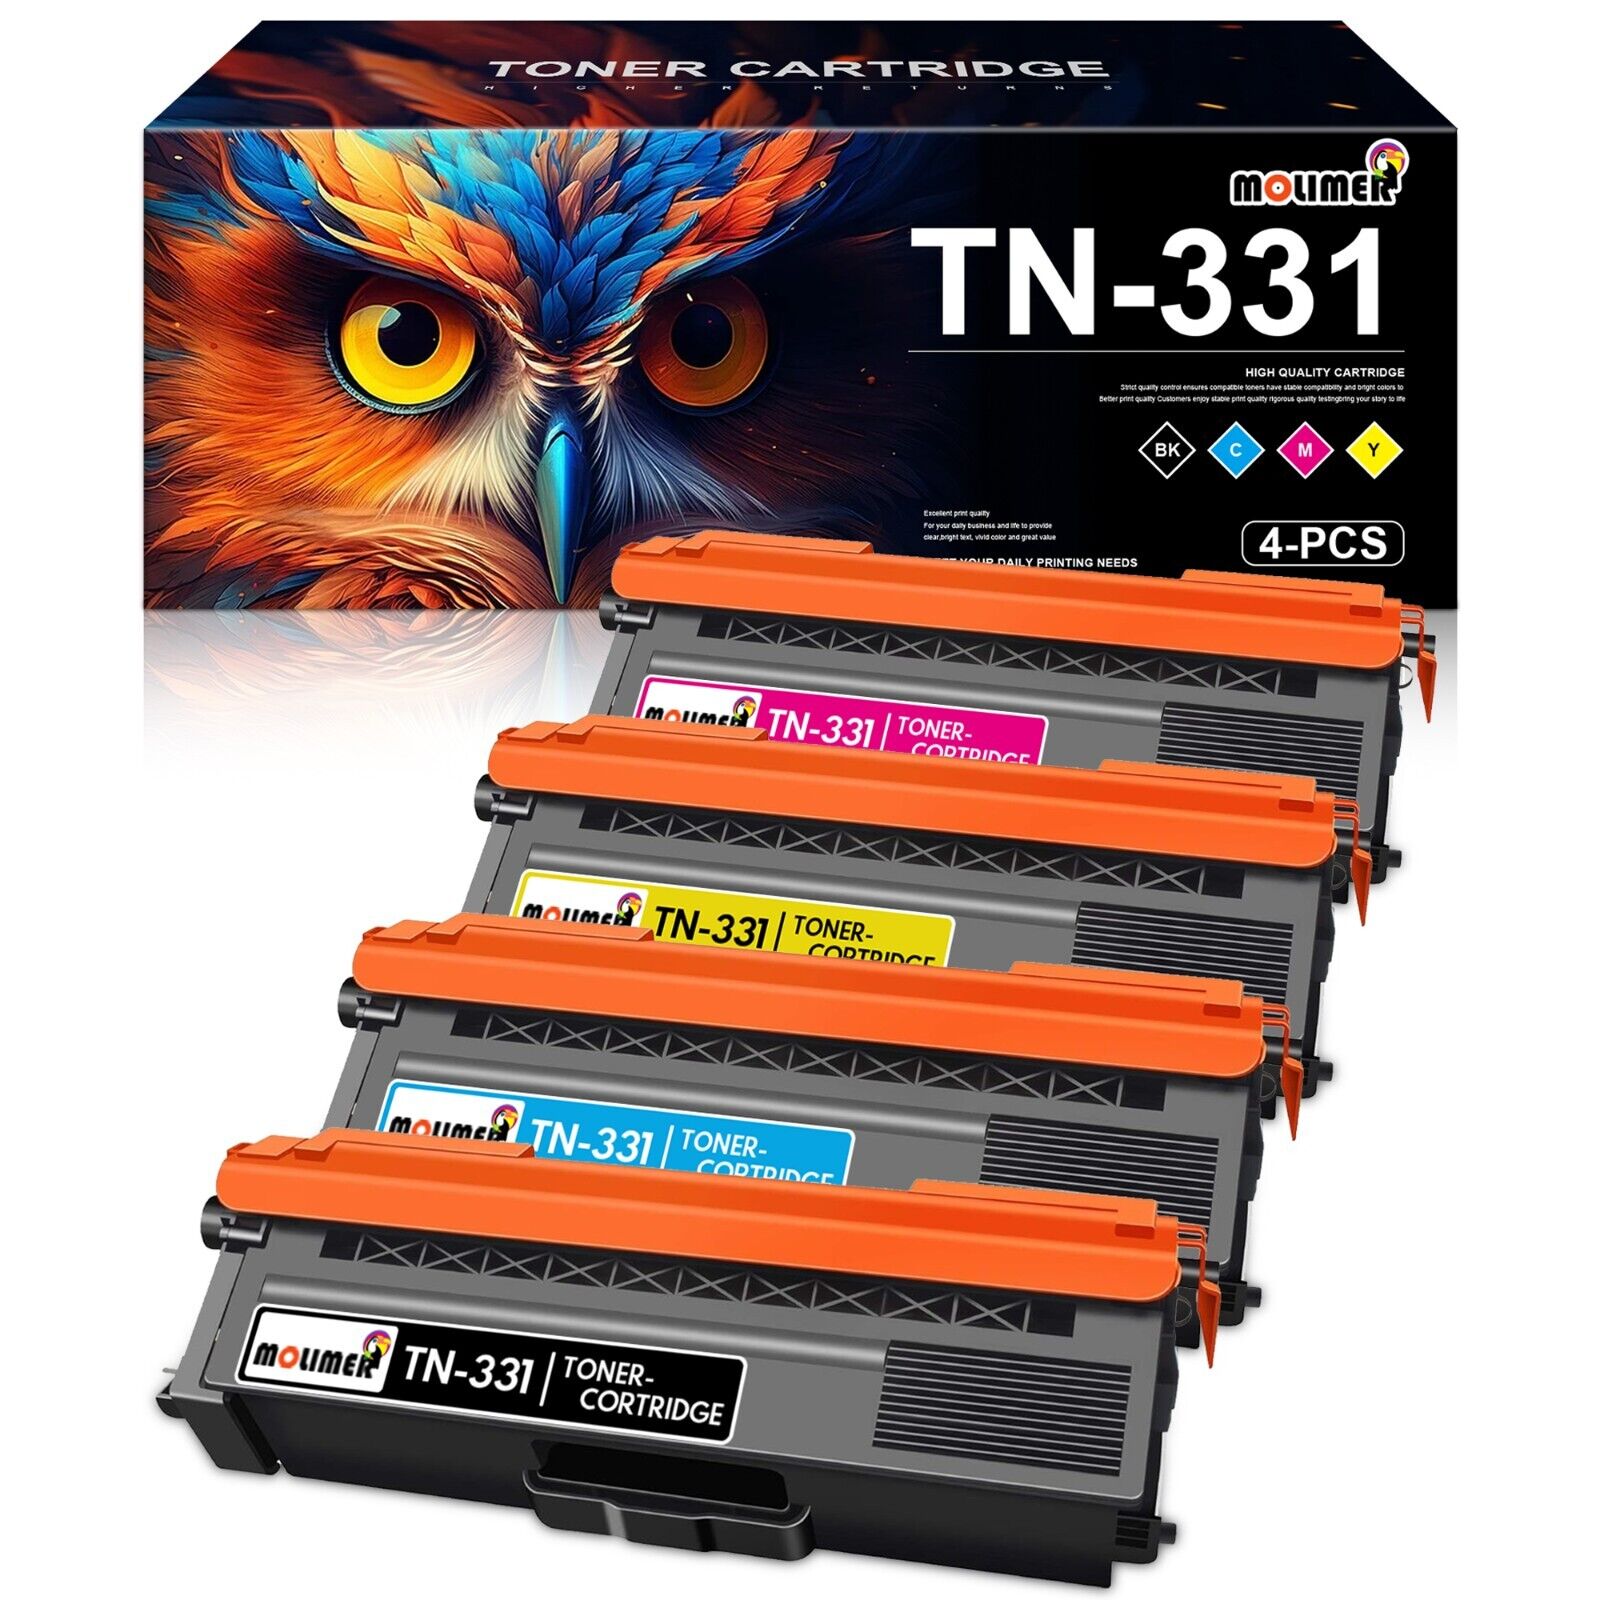 TN331 Toner High Yield Replacement for Brother TN331 MFC-L8600CDW 1BK/1C/1Y/1M